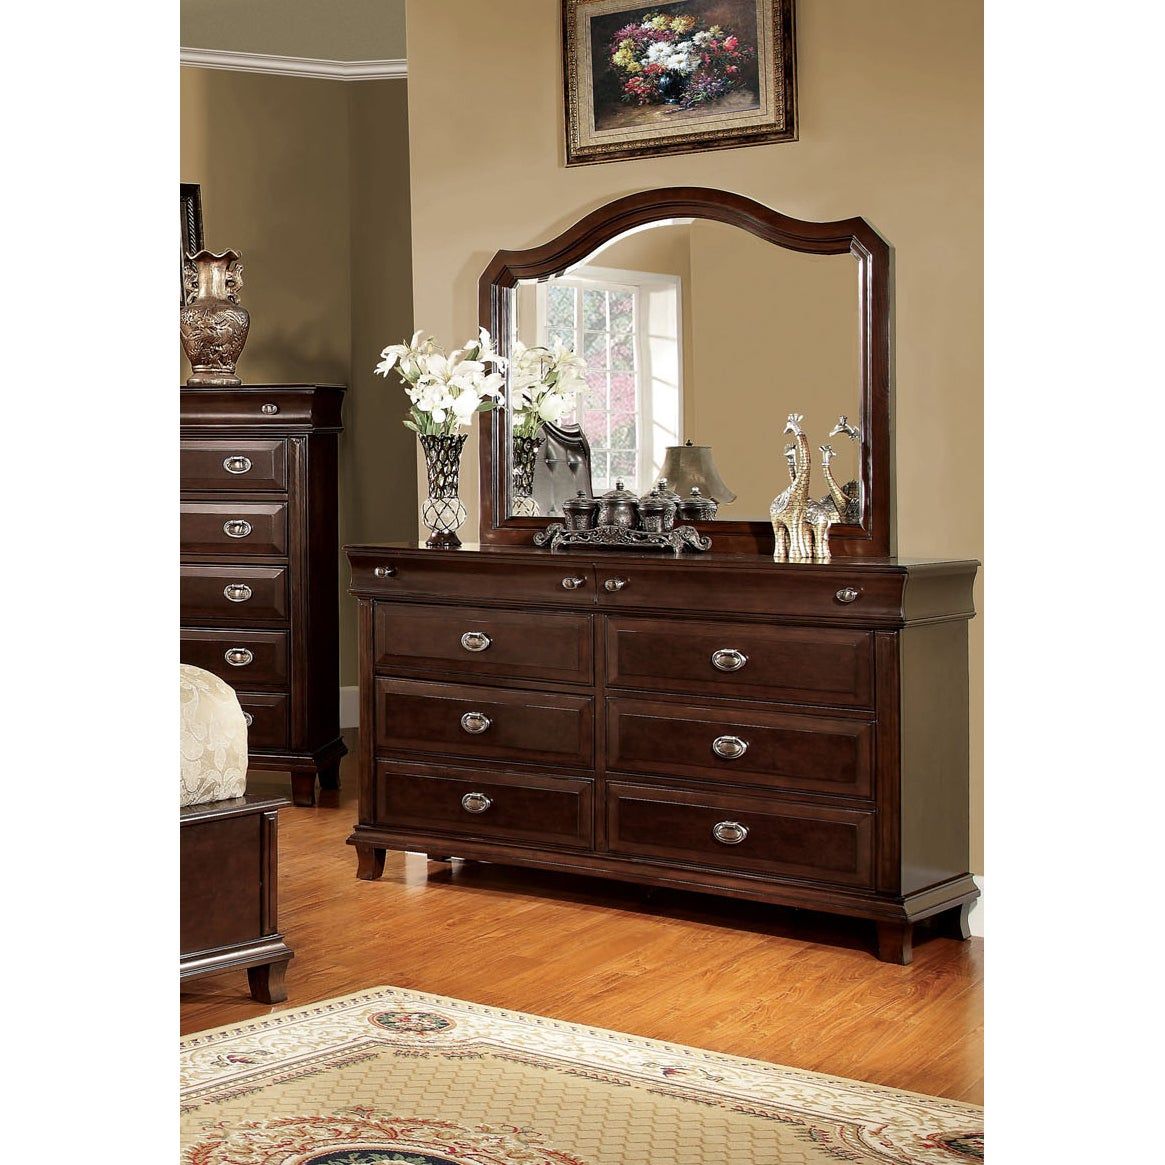 Fashionable Crownover 3 Piece Bar Table Sets With Regard To Shop Crown Transitional Brown Cherry 4 Piece Platform Bedroom Set (View 15 of 20)